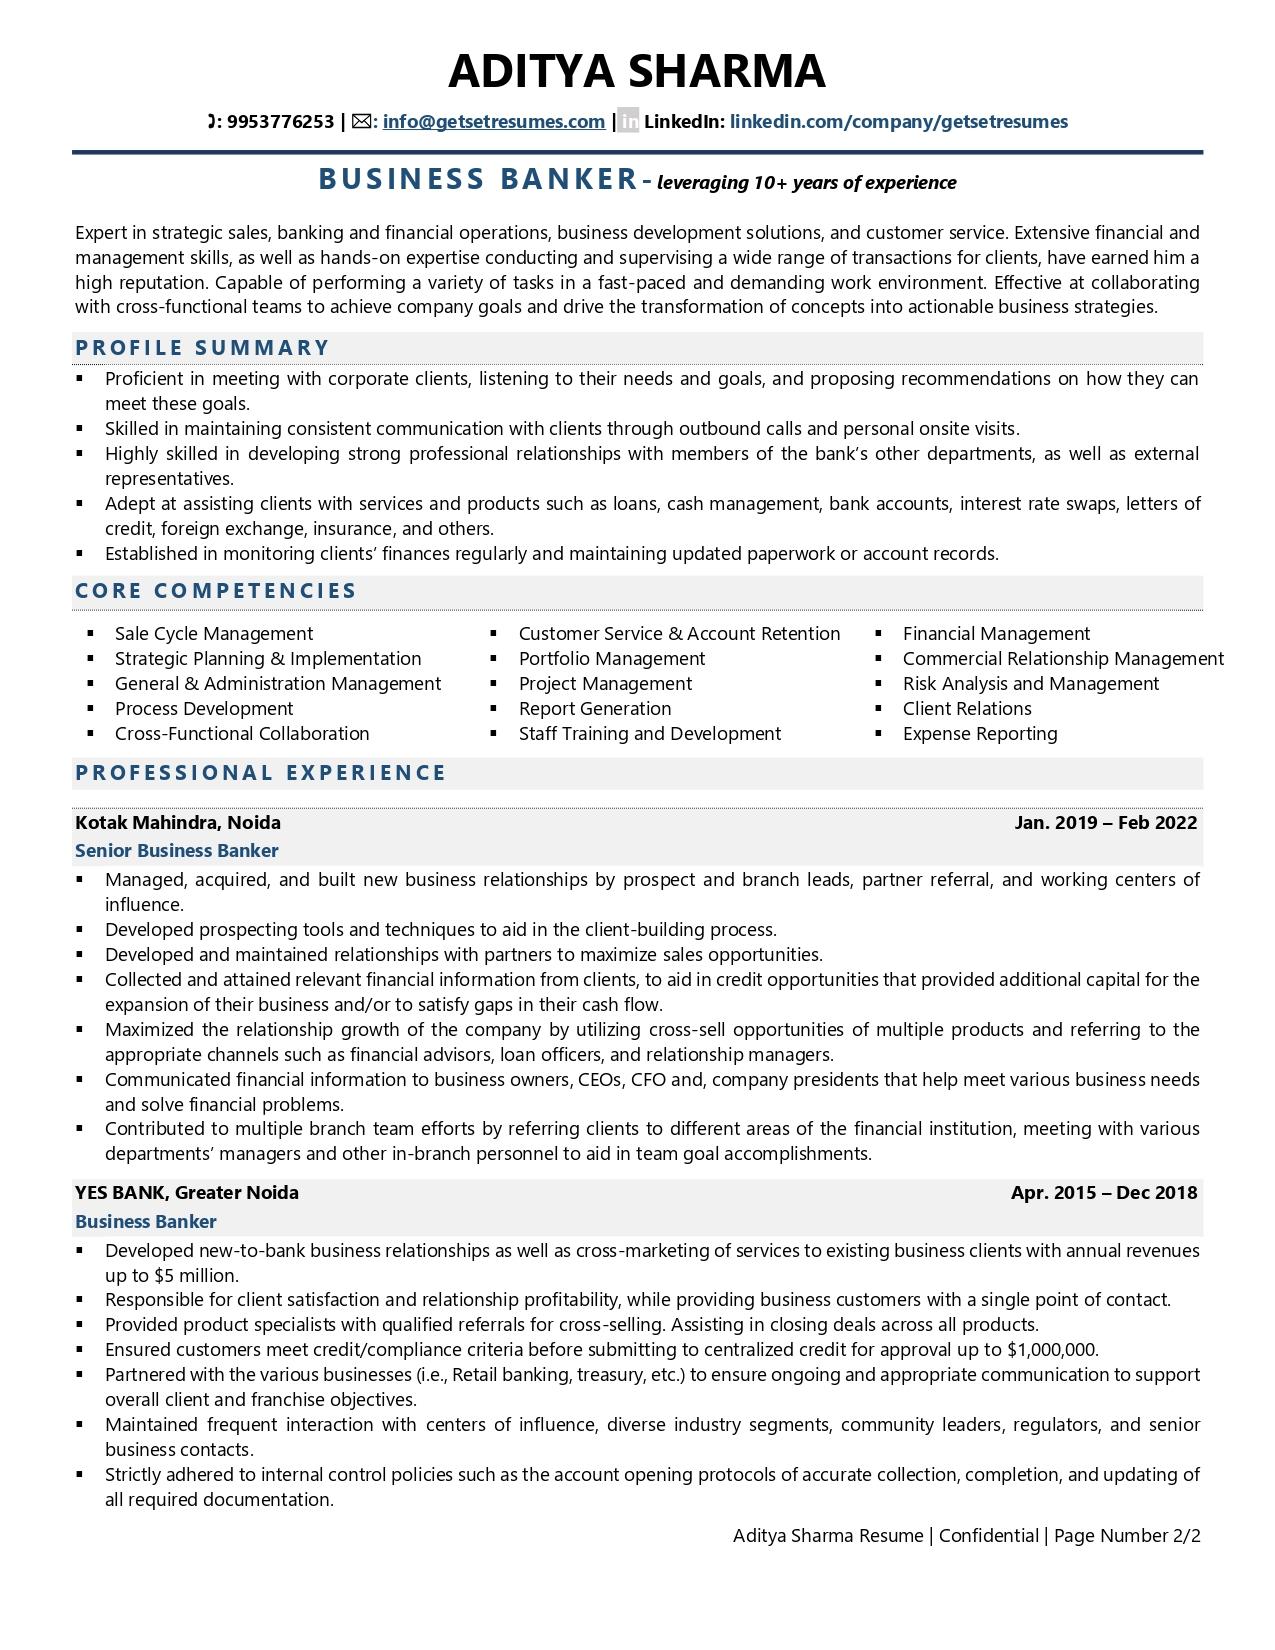 resume format for banking experience